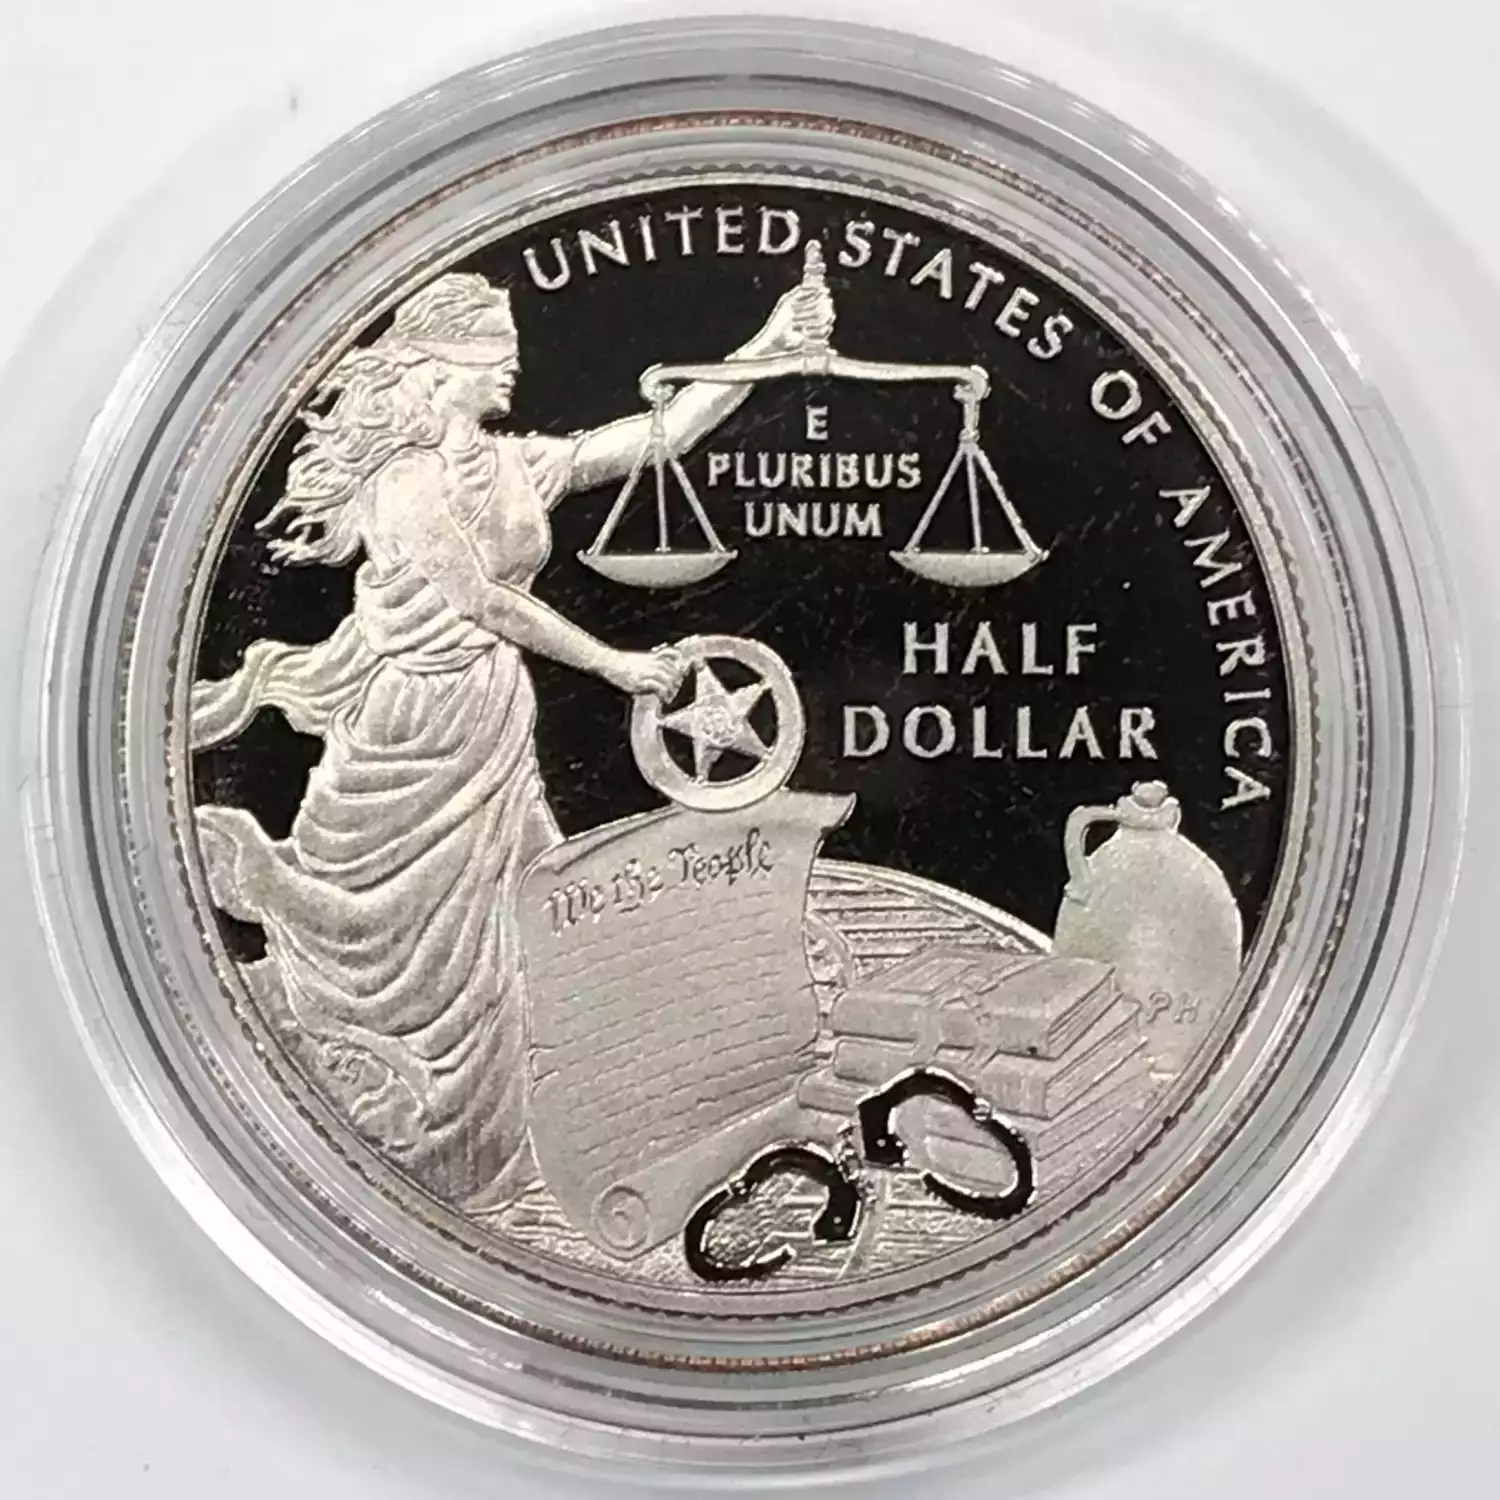 2011-S United States Army Proof Clad Half Dollar w US Mint OGP - Box & COA [DUPLICATE for #547955] (5)